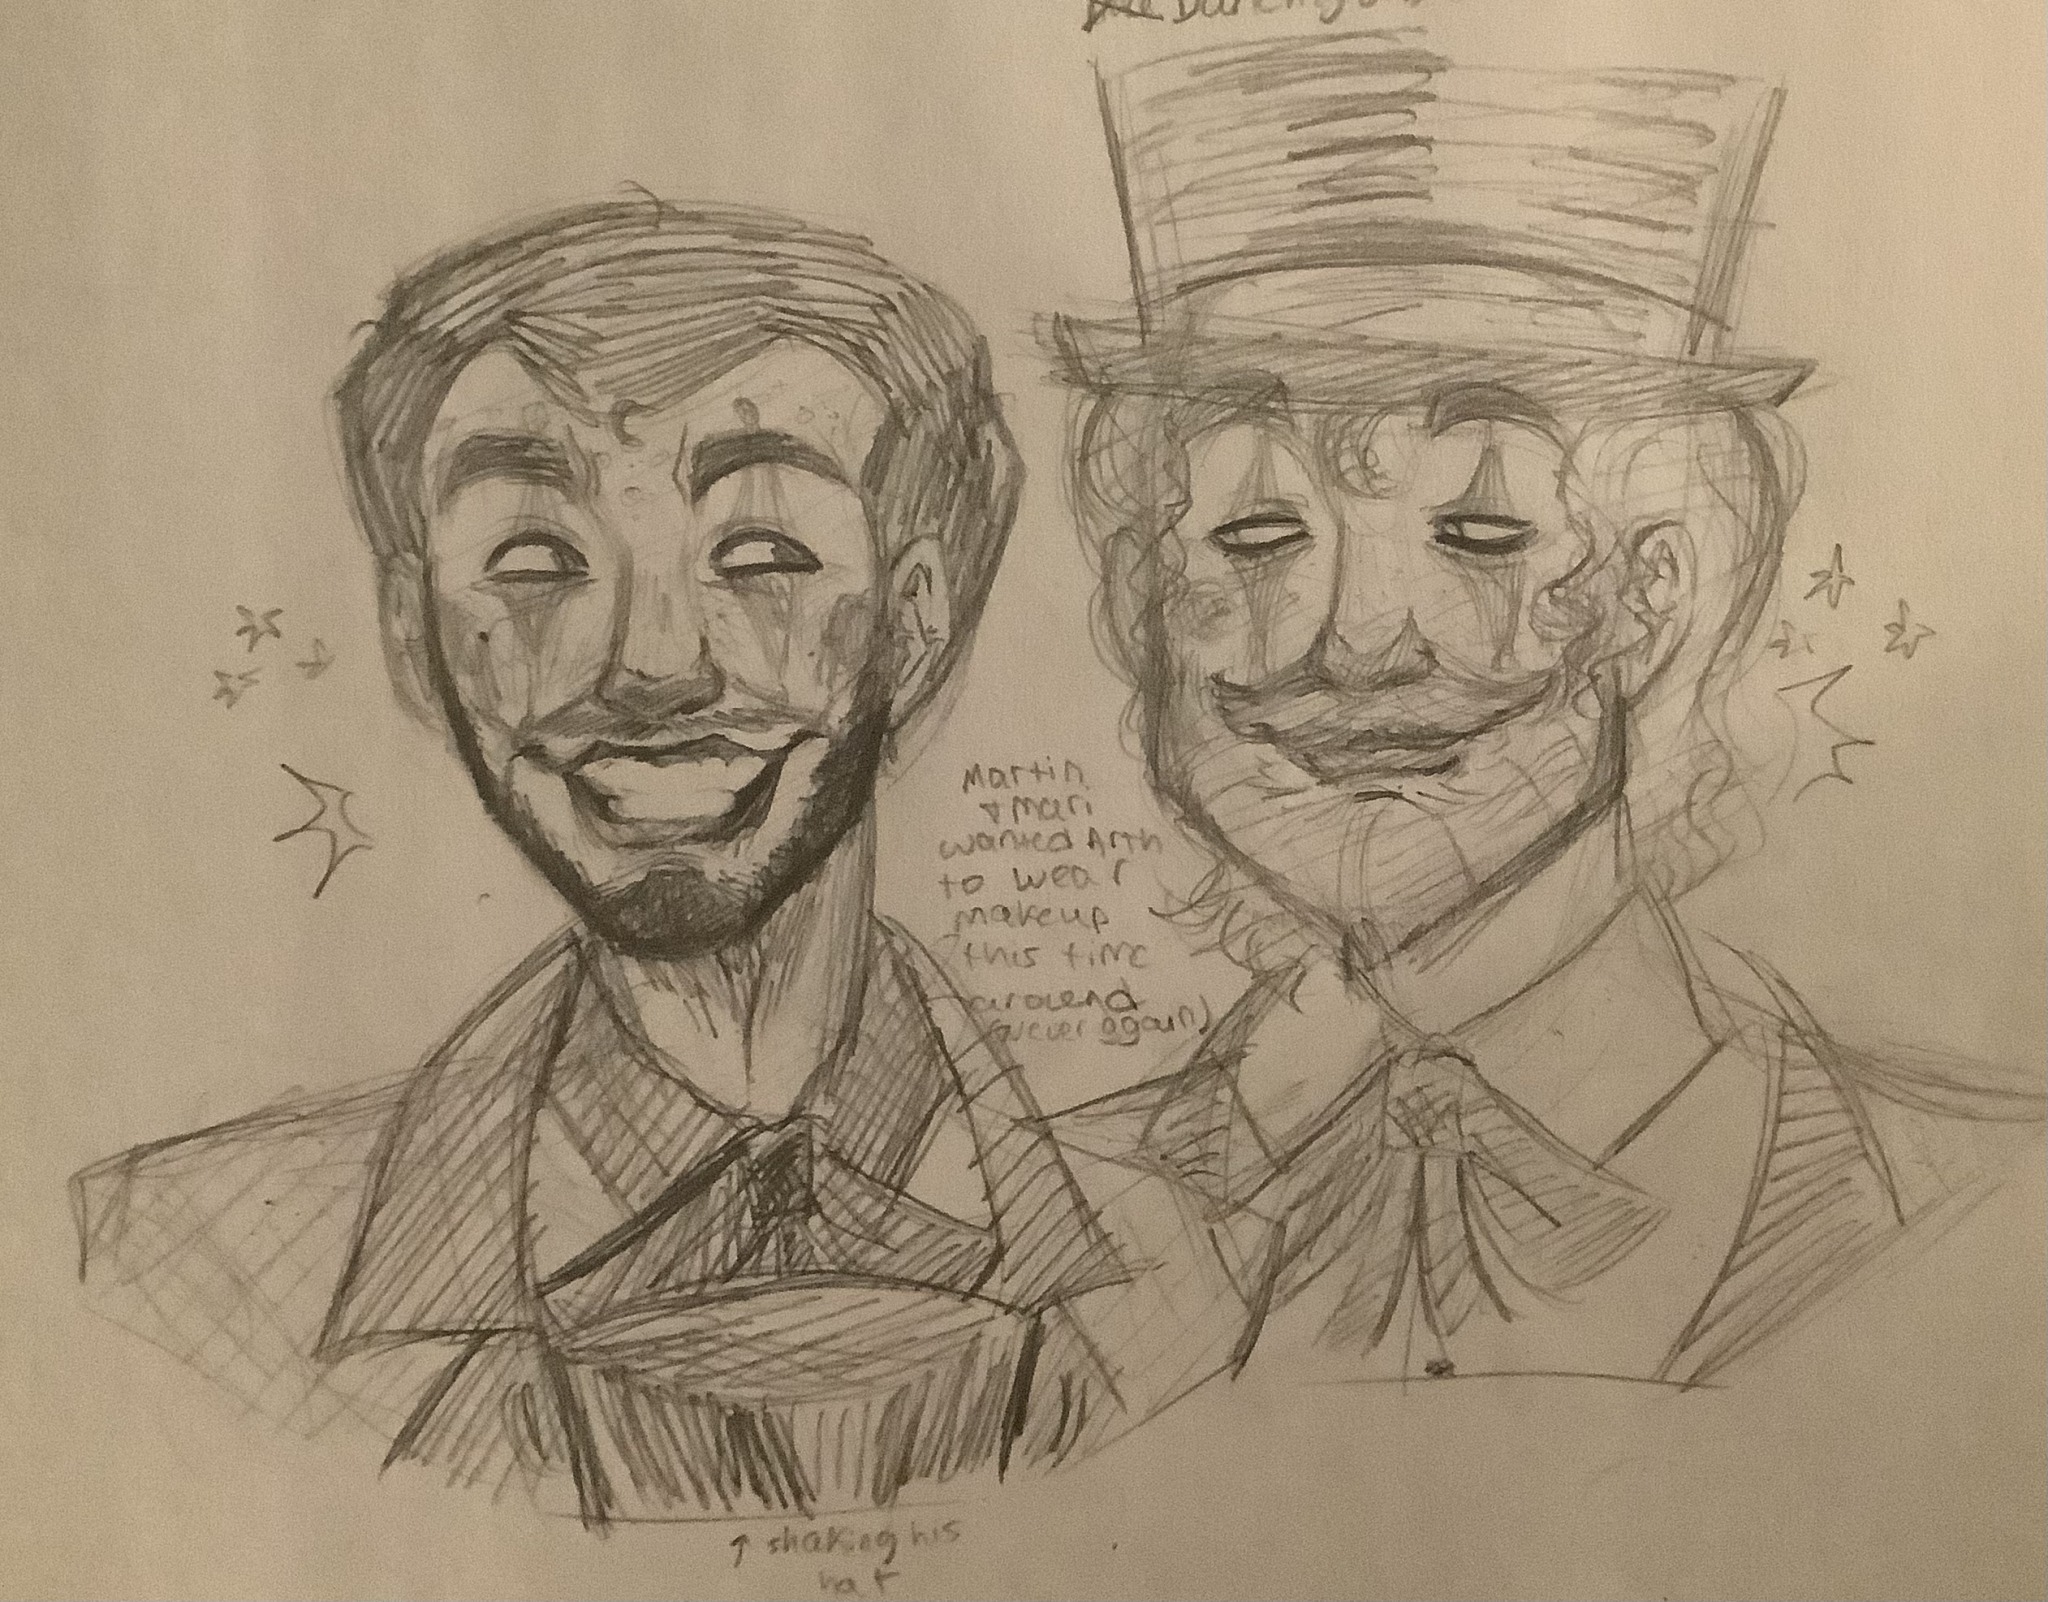 Arthur GreyWhinder wears clown makeup (Harmony and Horror)